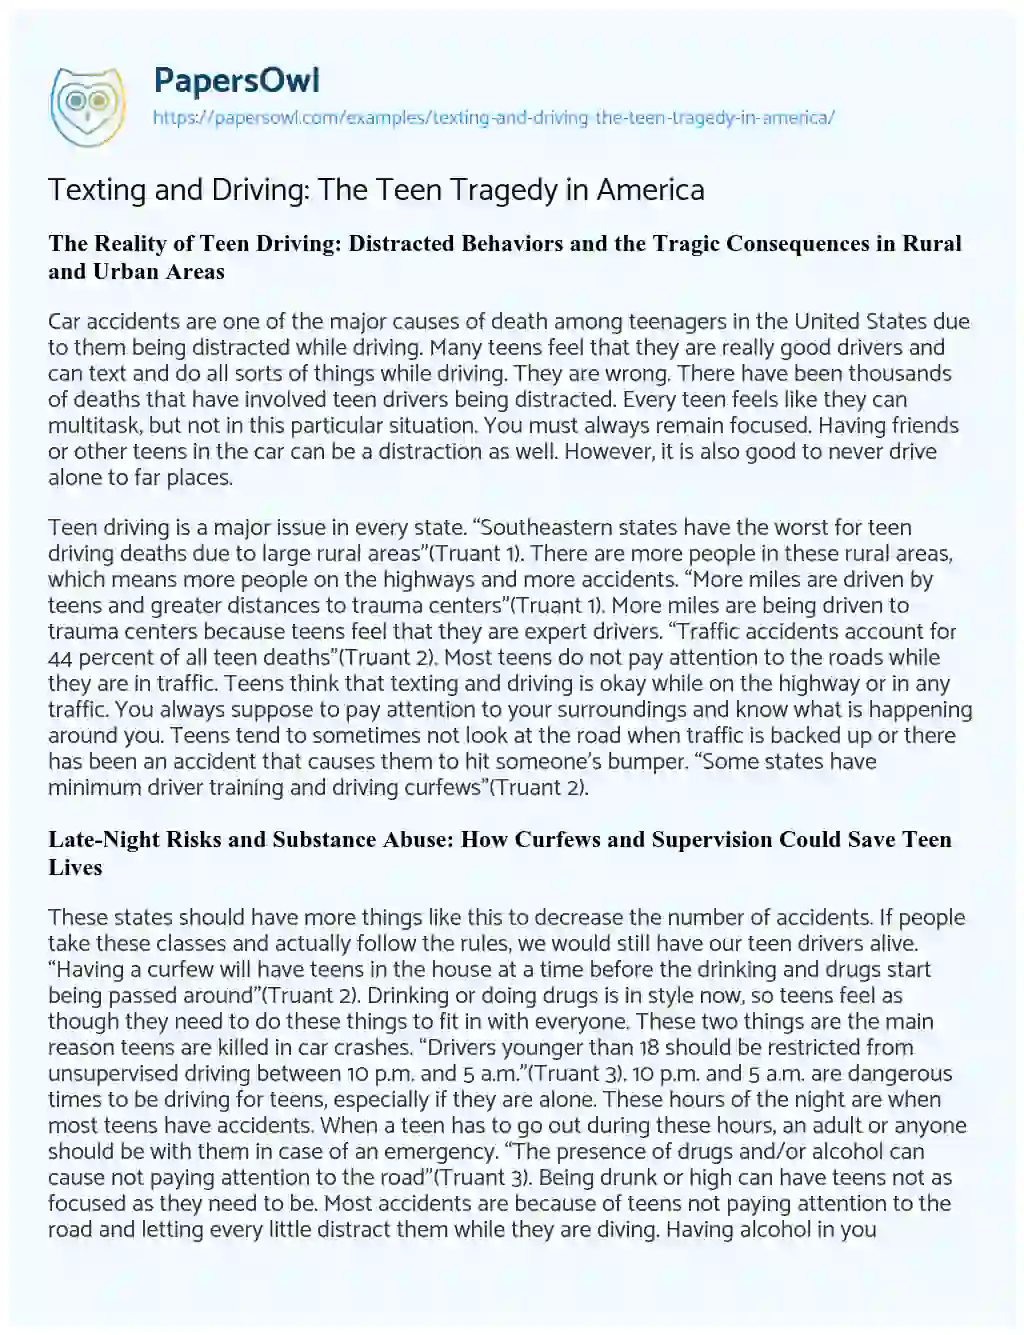 Essay on Texting and Driving: the Teen Tragedy in America